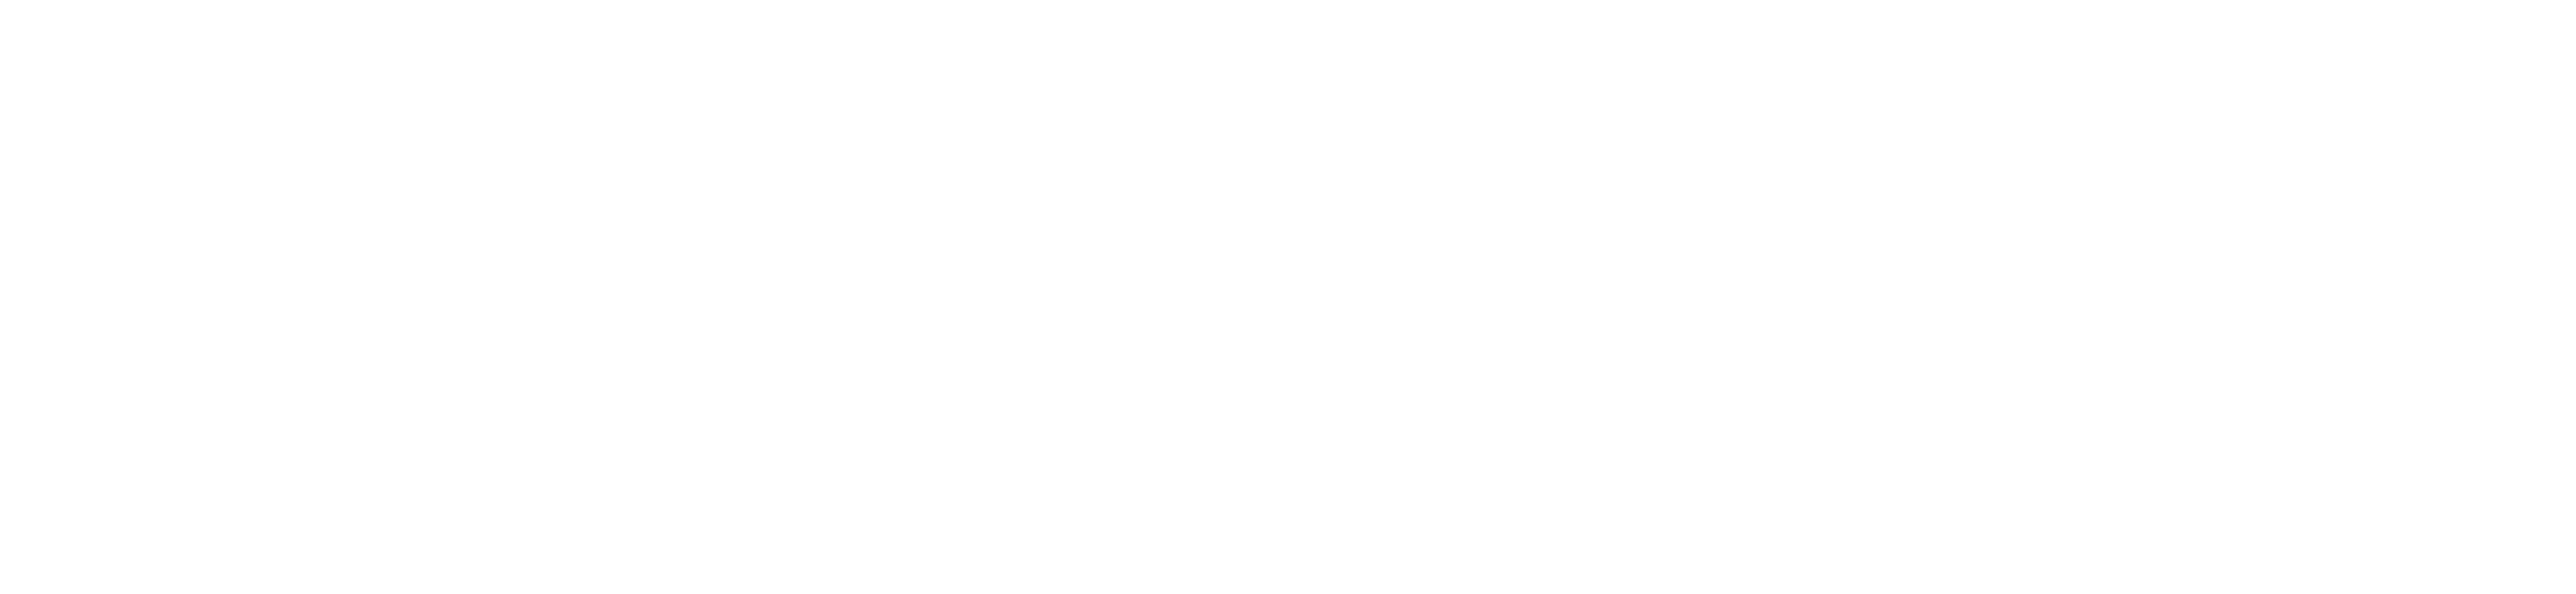 Life Without Basketball